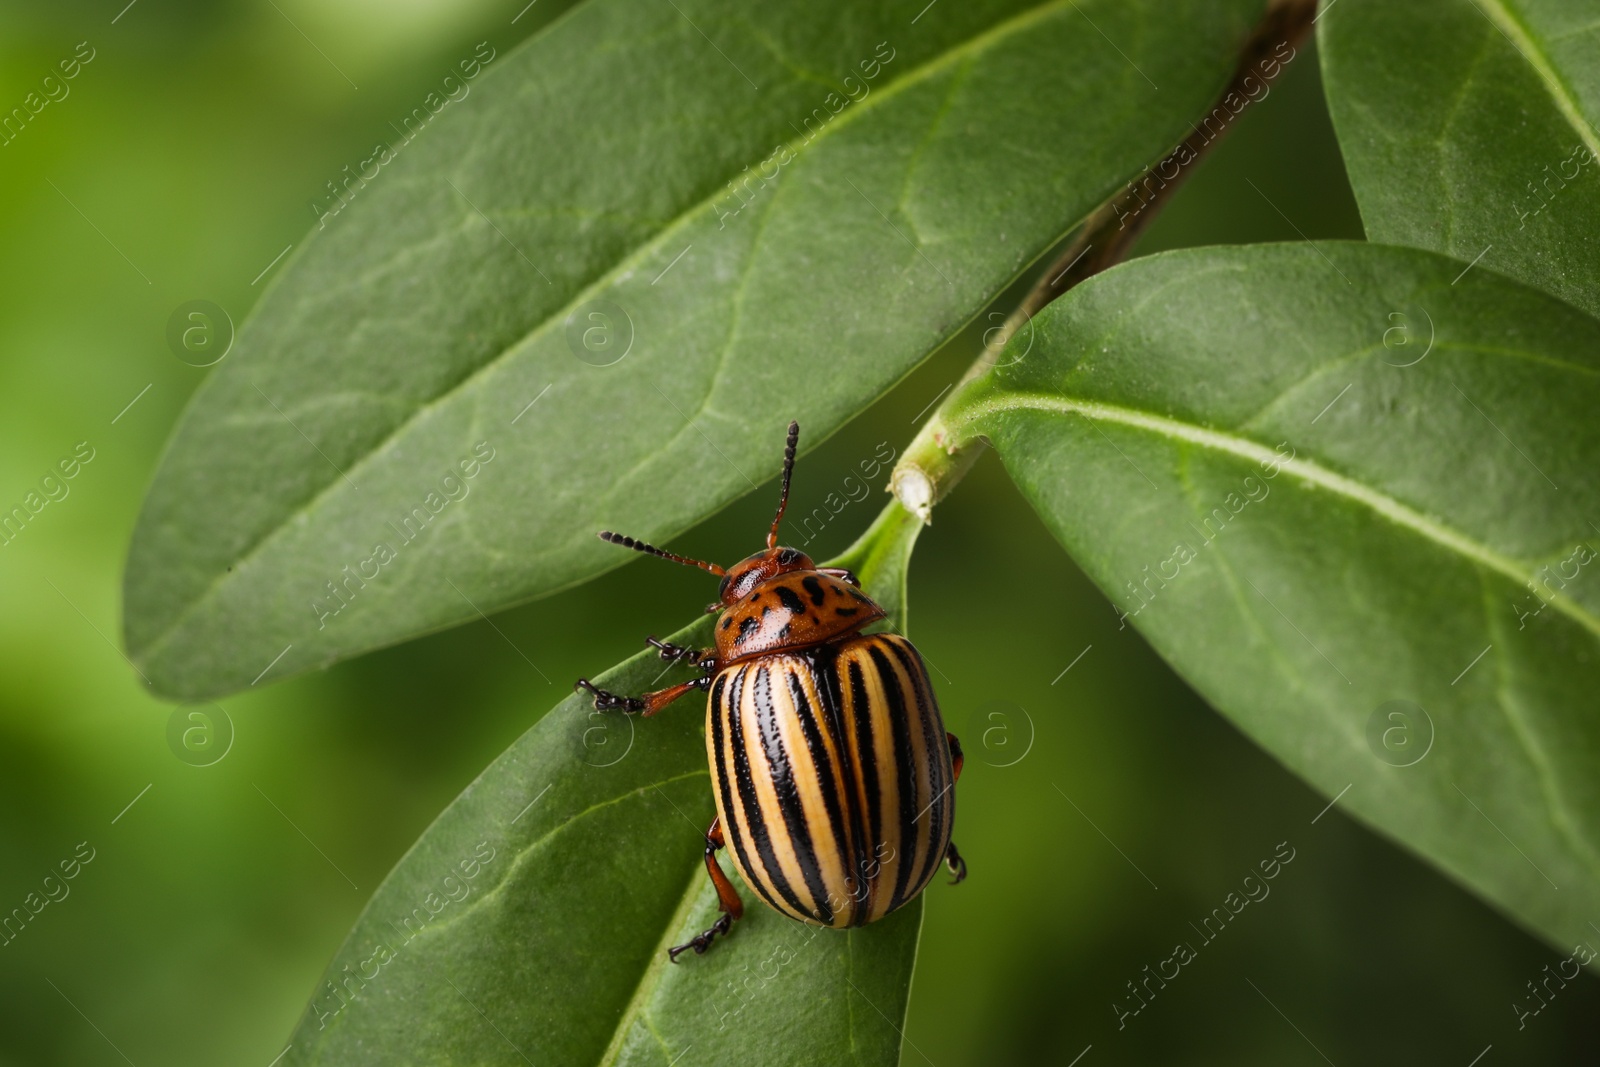 Photo of Colorado potato beetle on green plant against blurred background, closeup